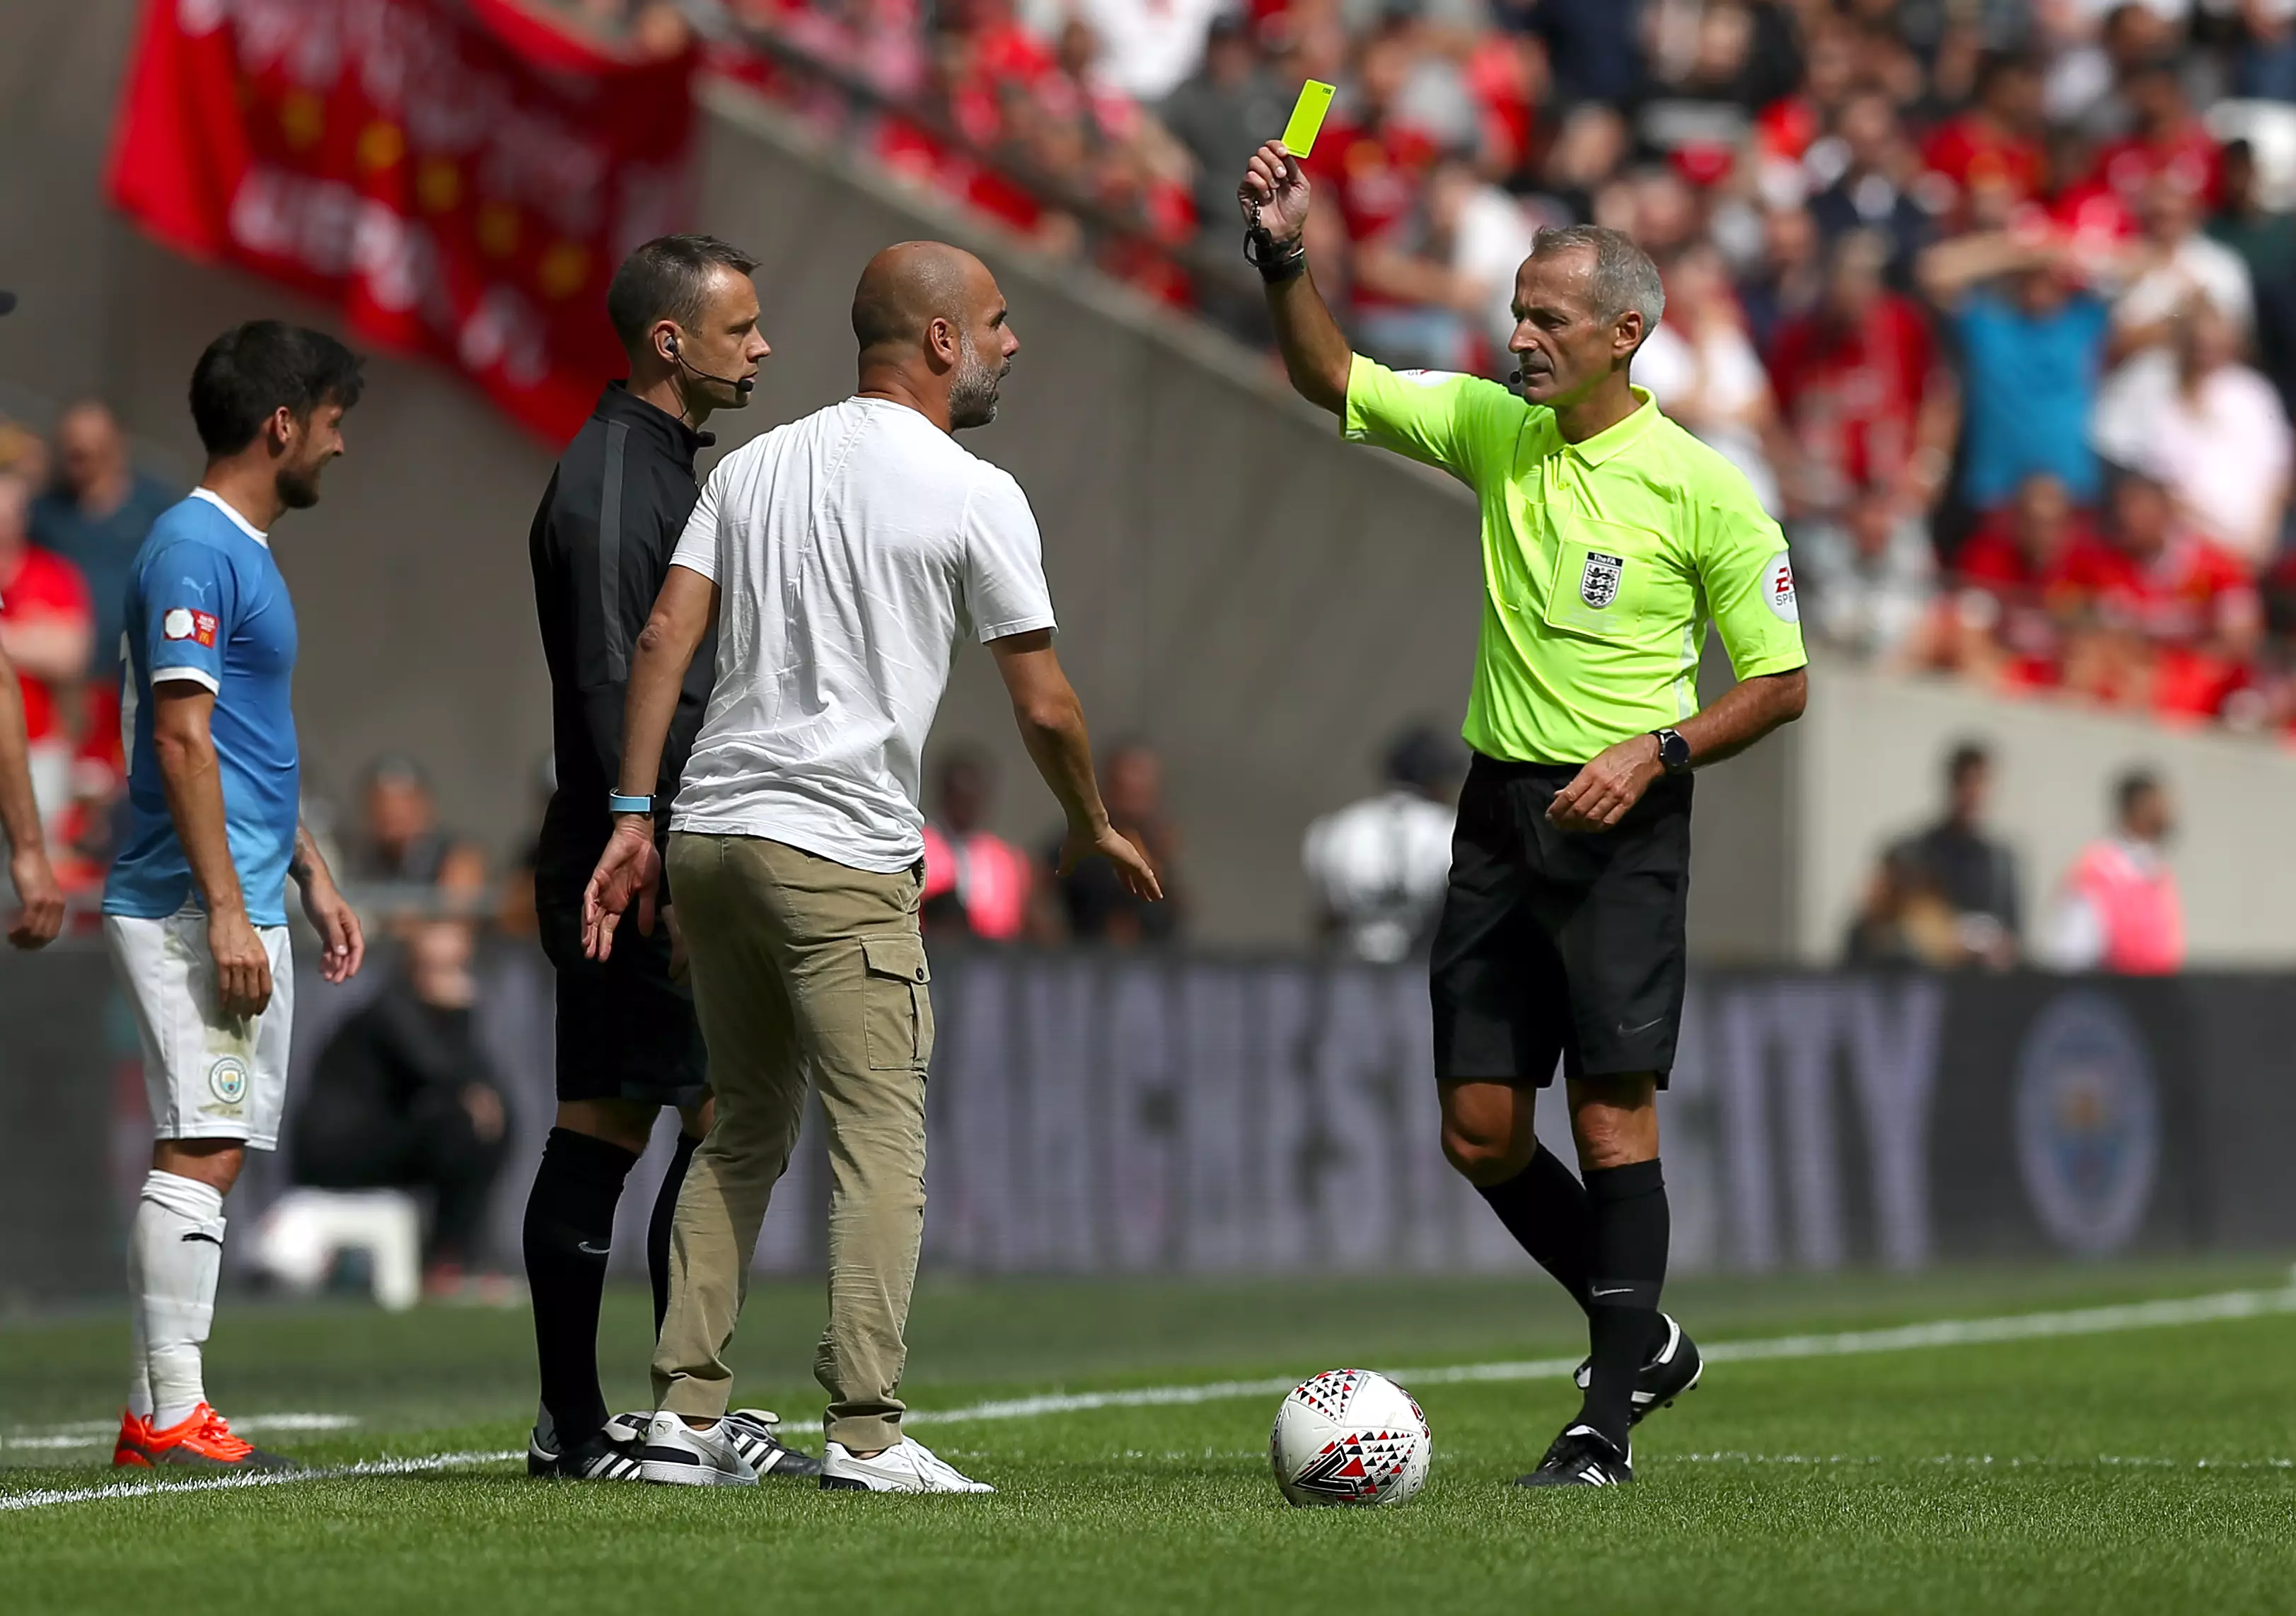 Guardiola picked up his first yellow of the season, kind of. Image: PA Images